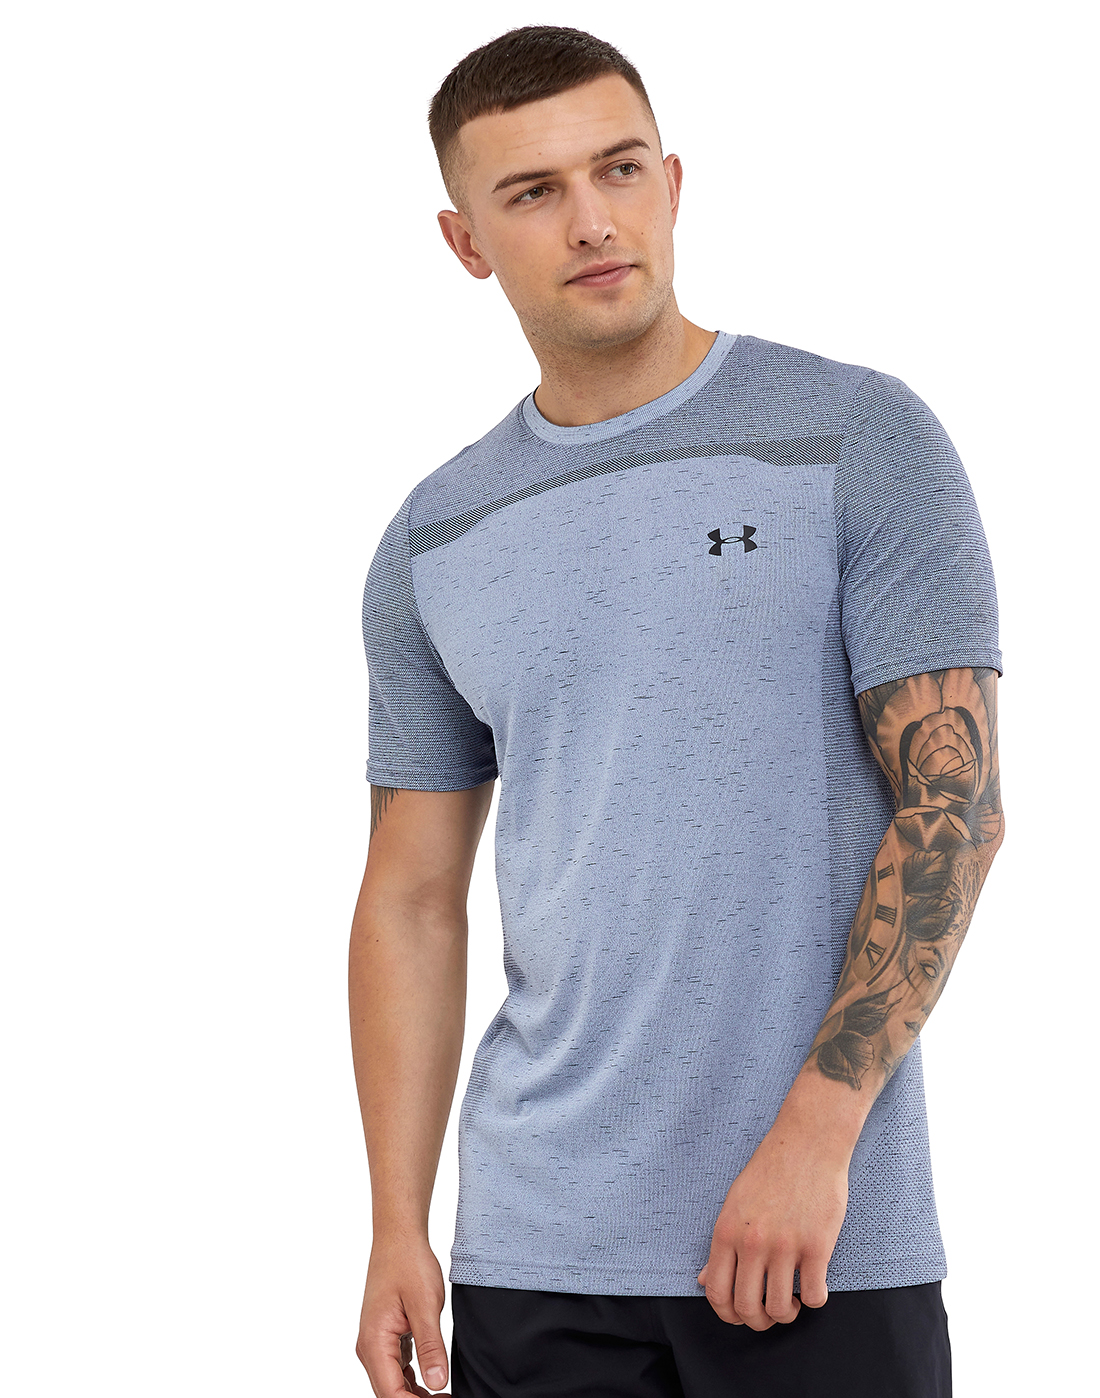 Under Armour Mens Seamless T-Shirt - Blue | Life Style Sports IE